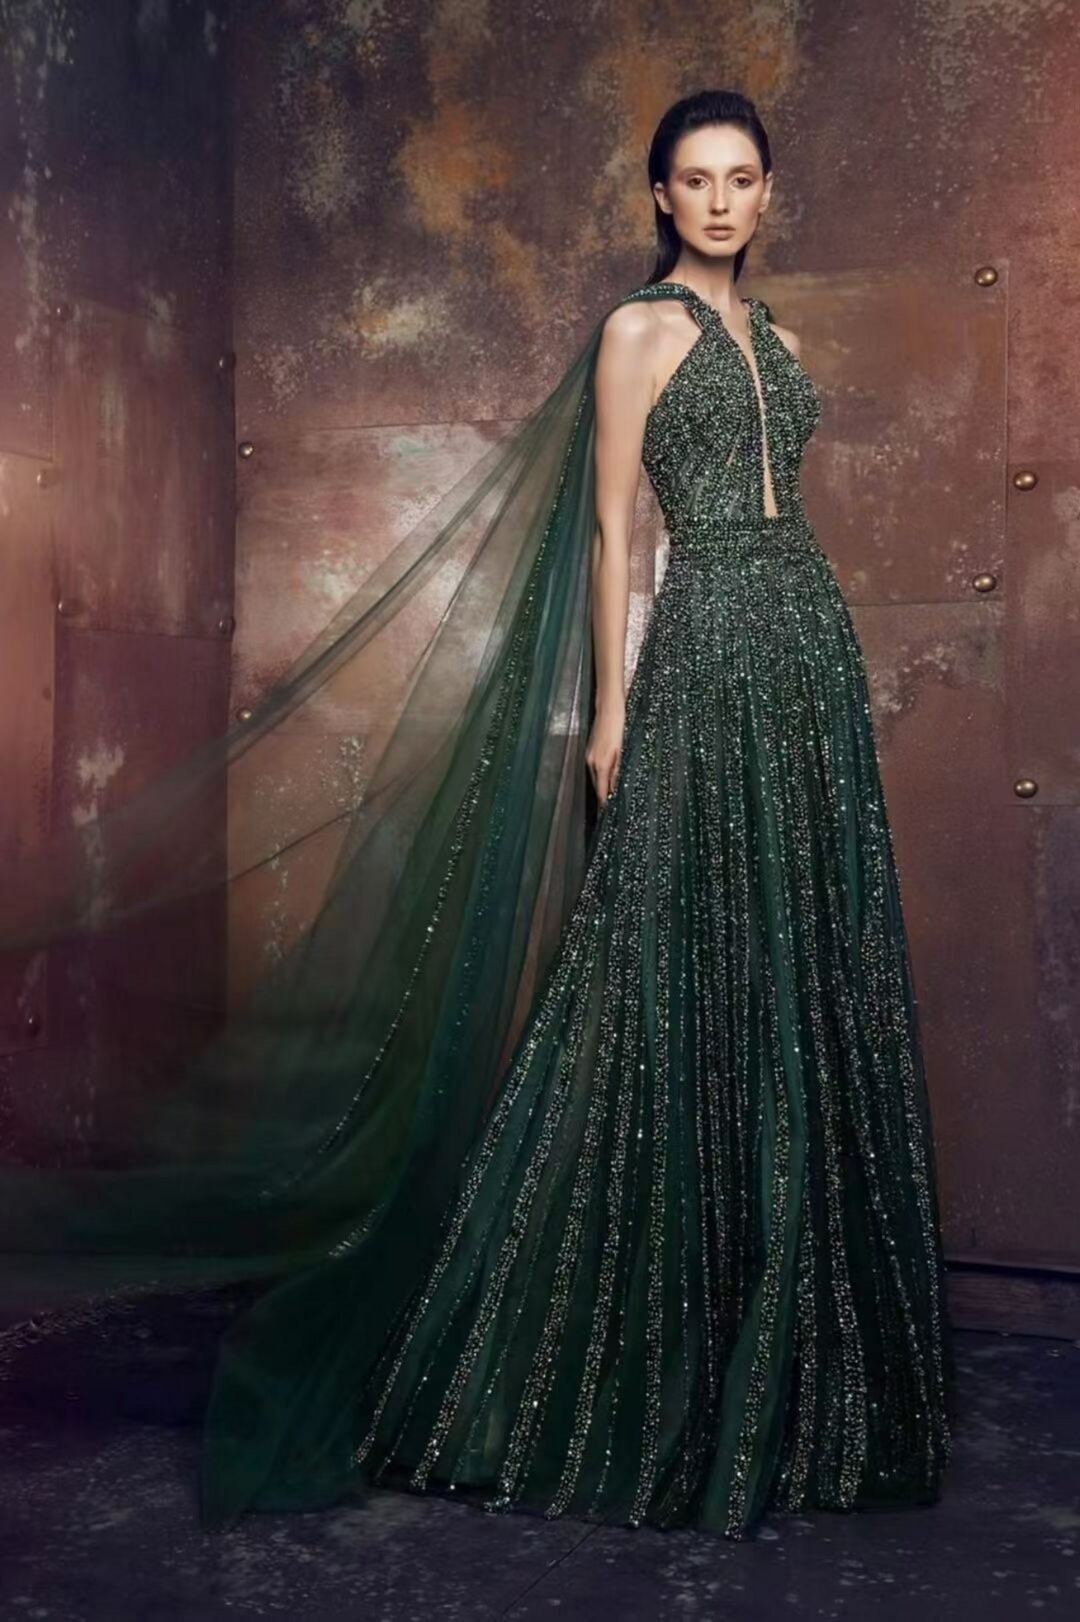 2023 green wedding dress trends for brides who want a fresh look ...